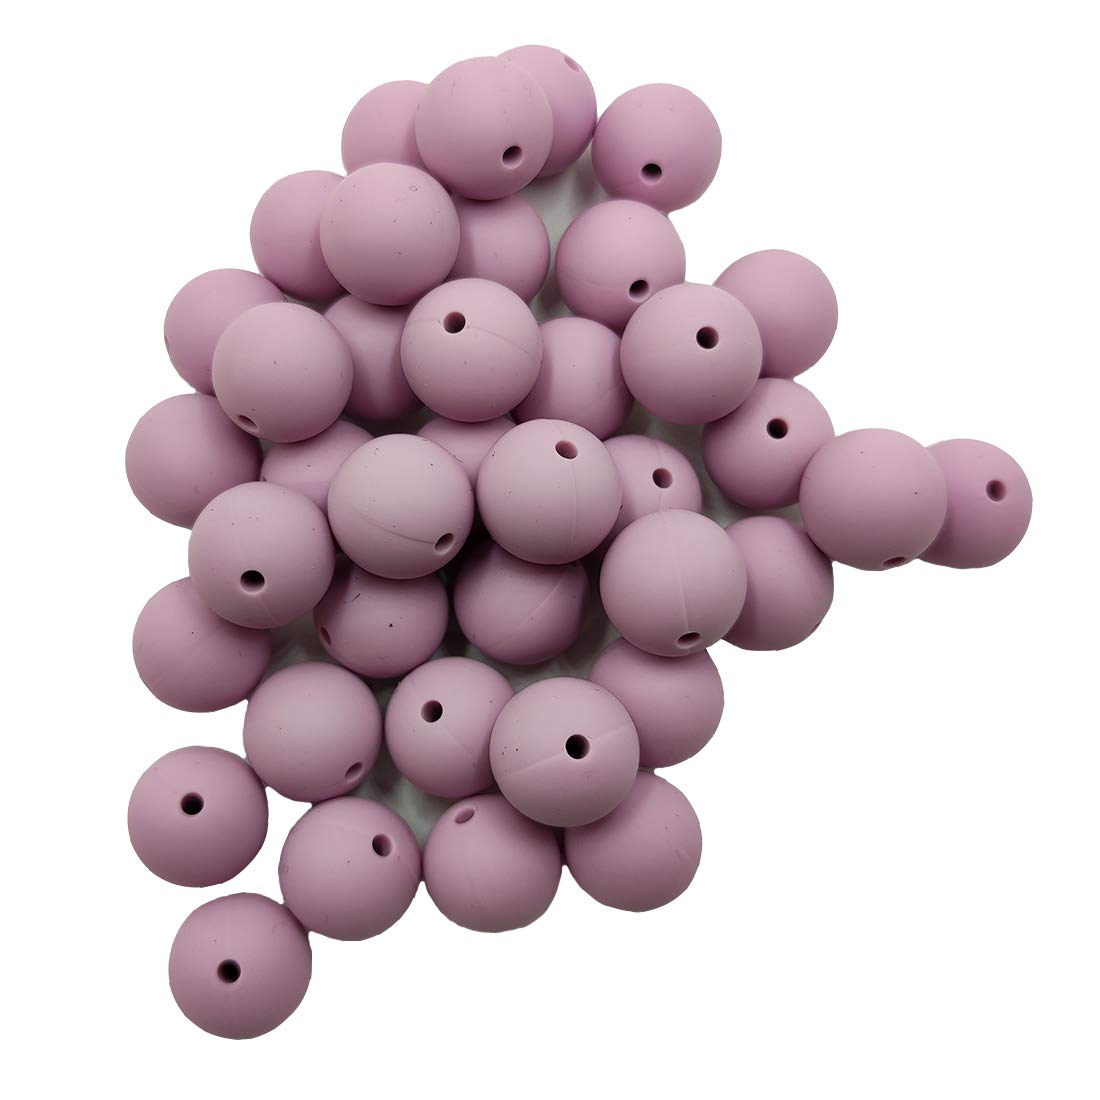 15mm Purple Silicone Beads, Silicone Beads in Bulk, 15mm Silicone